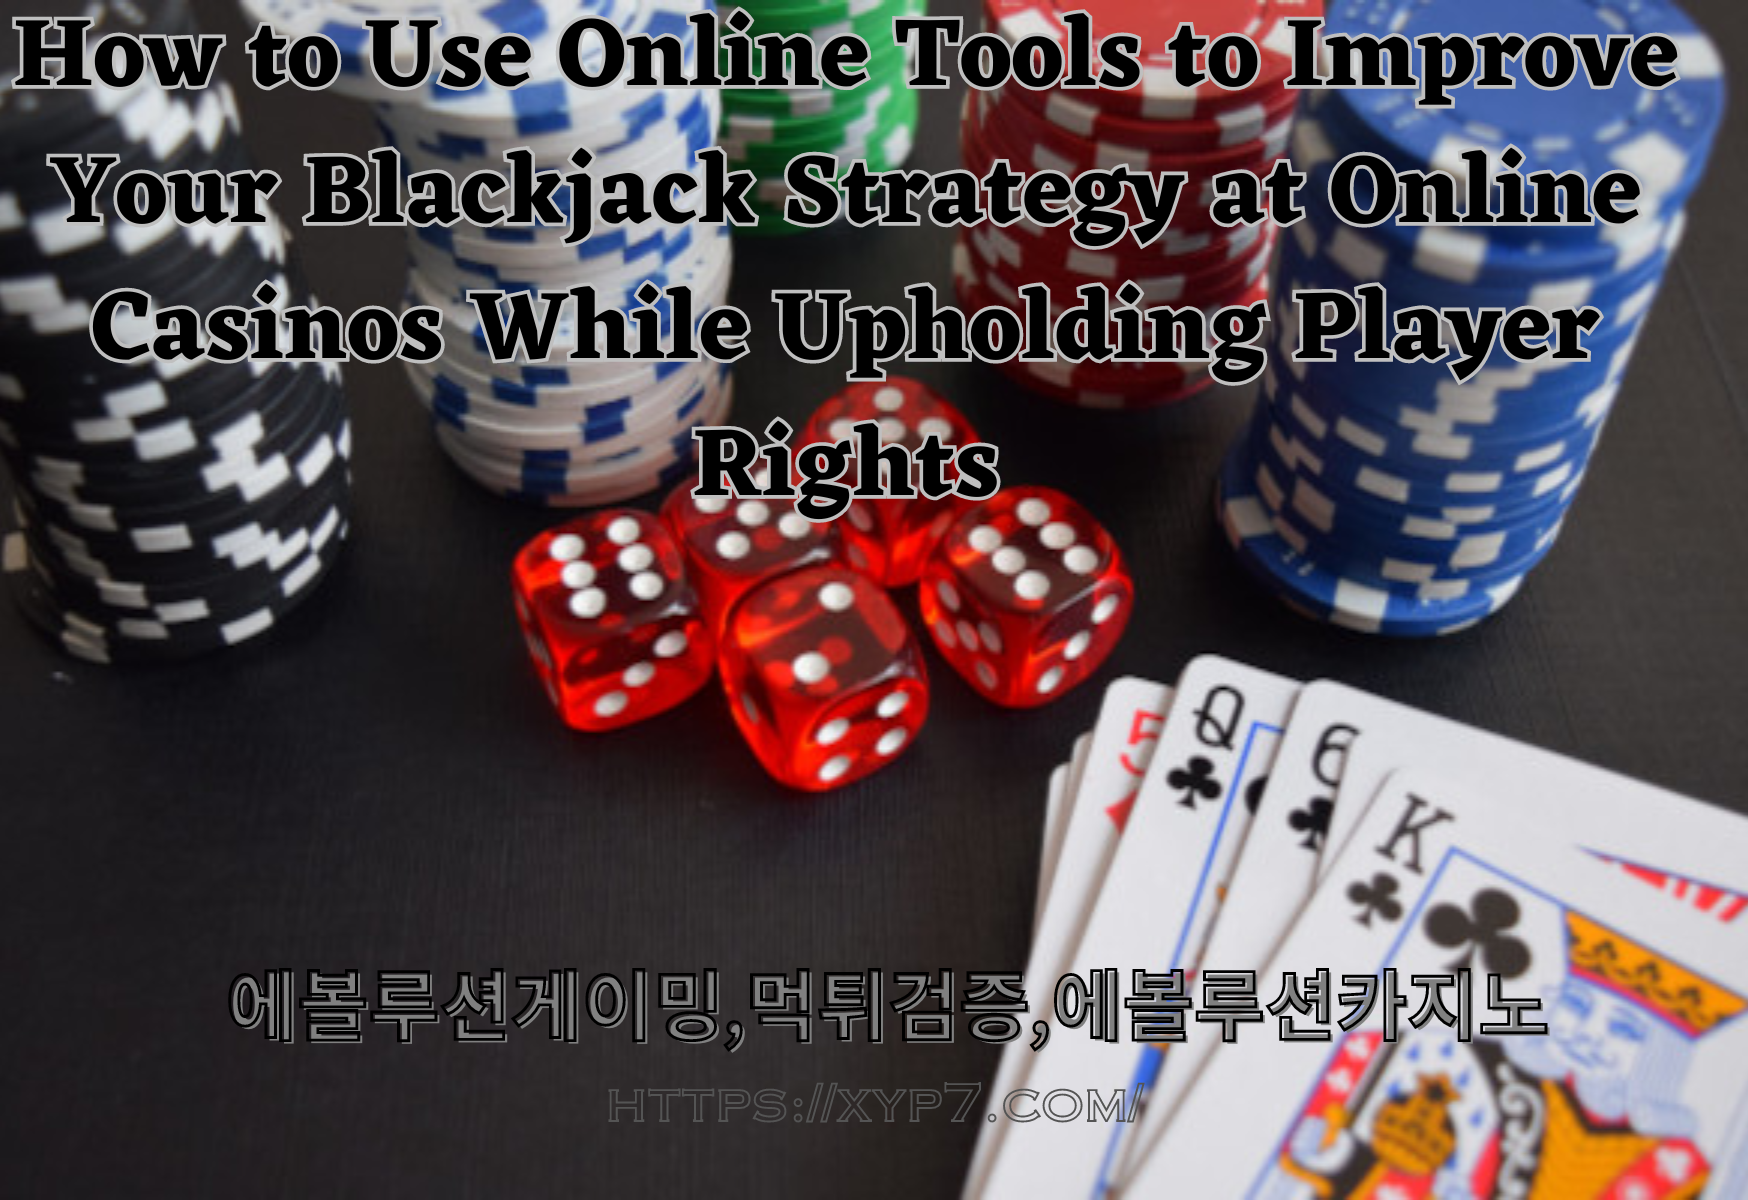 How to Use Online Tools to Improve Your Blackjack Strategy at Online Casinos While Upholding Player Rights